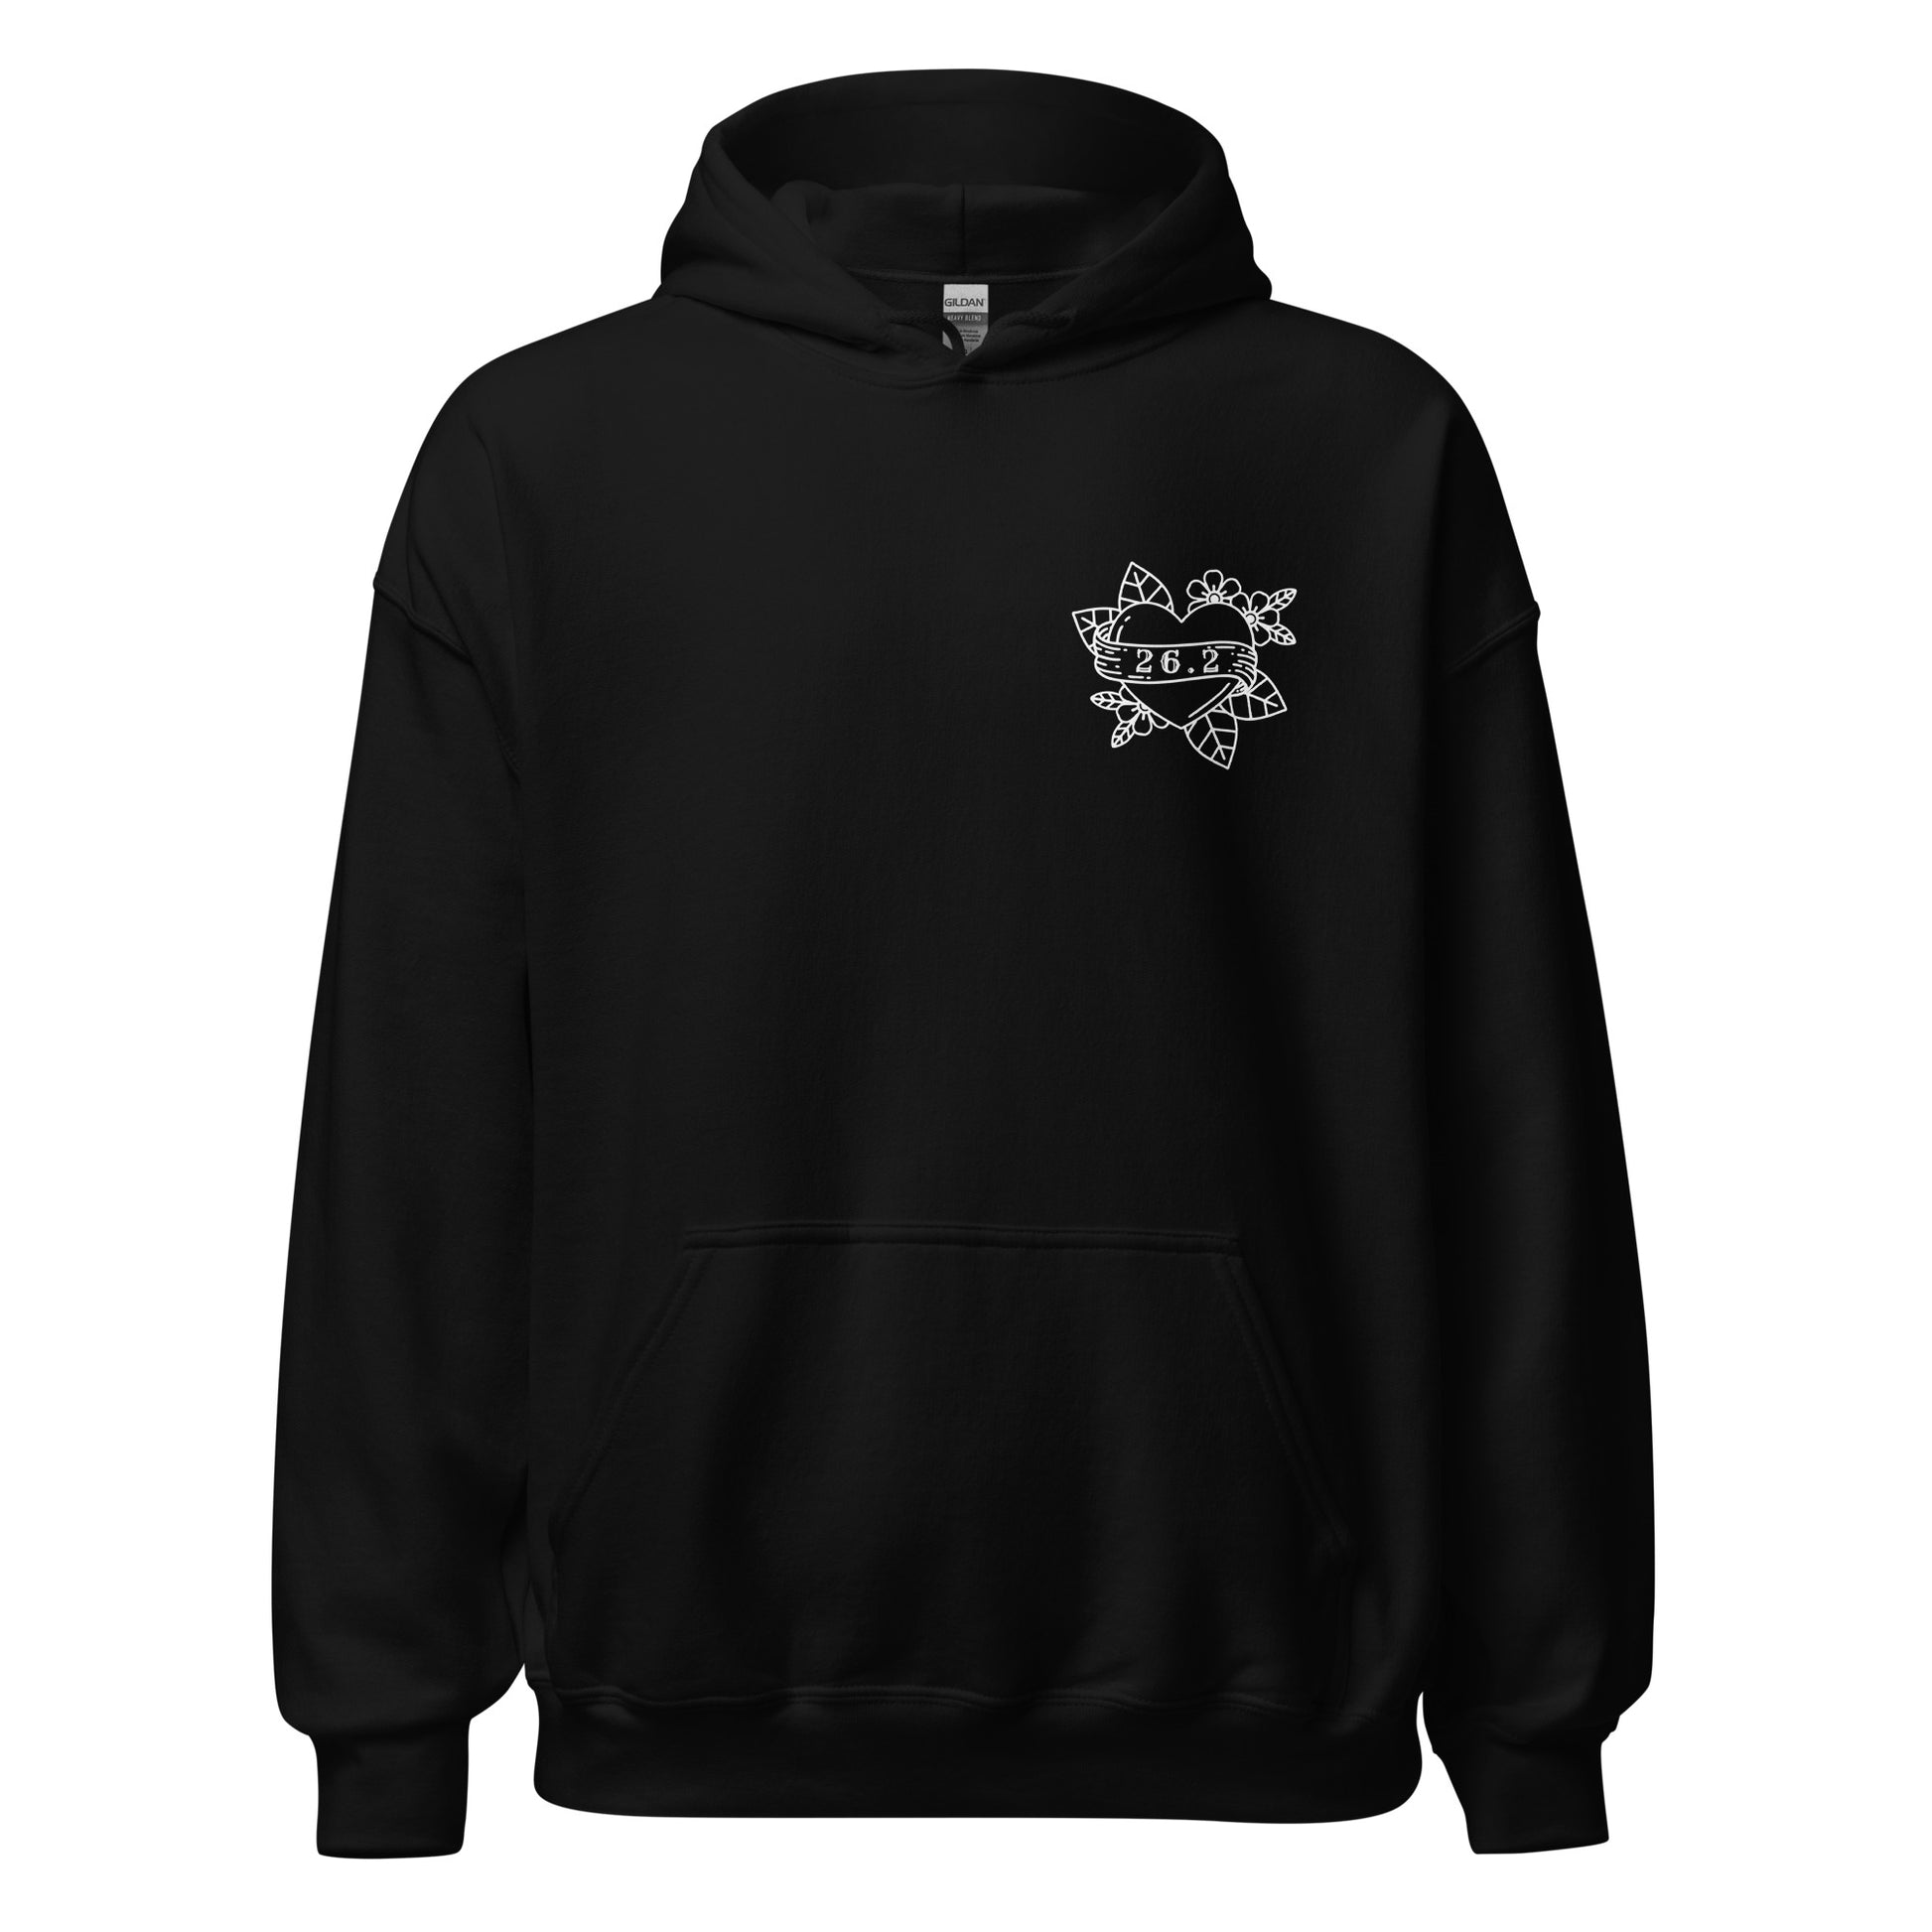 black hoodie with 26.2 marathon distance in a tattoo style heart across the left breast